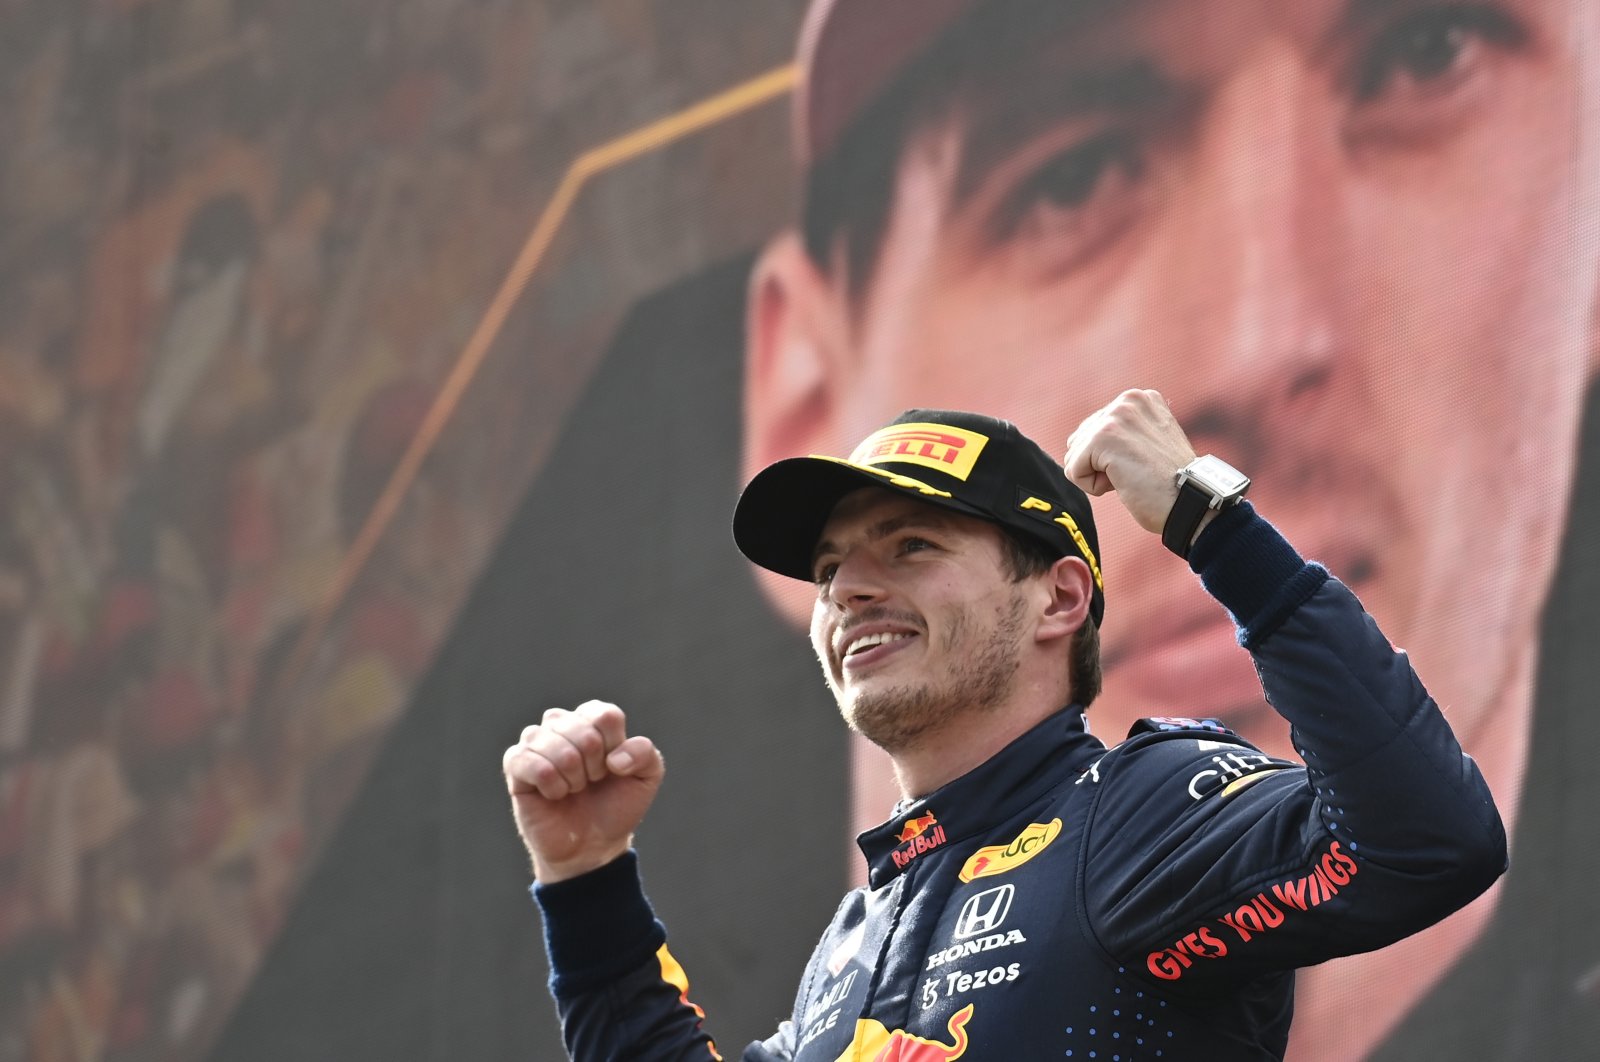 Red Bull's Dutch driver Max Verstappen celebrates on the podium after winning the Austrian Formula One Grand Prix at the Red Bull Ring racetrack in Spielberg, Austria, July 4, 2021. (AP Photo)